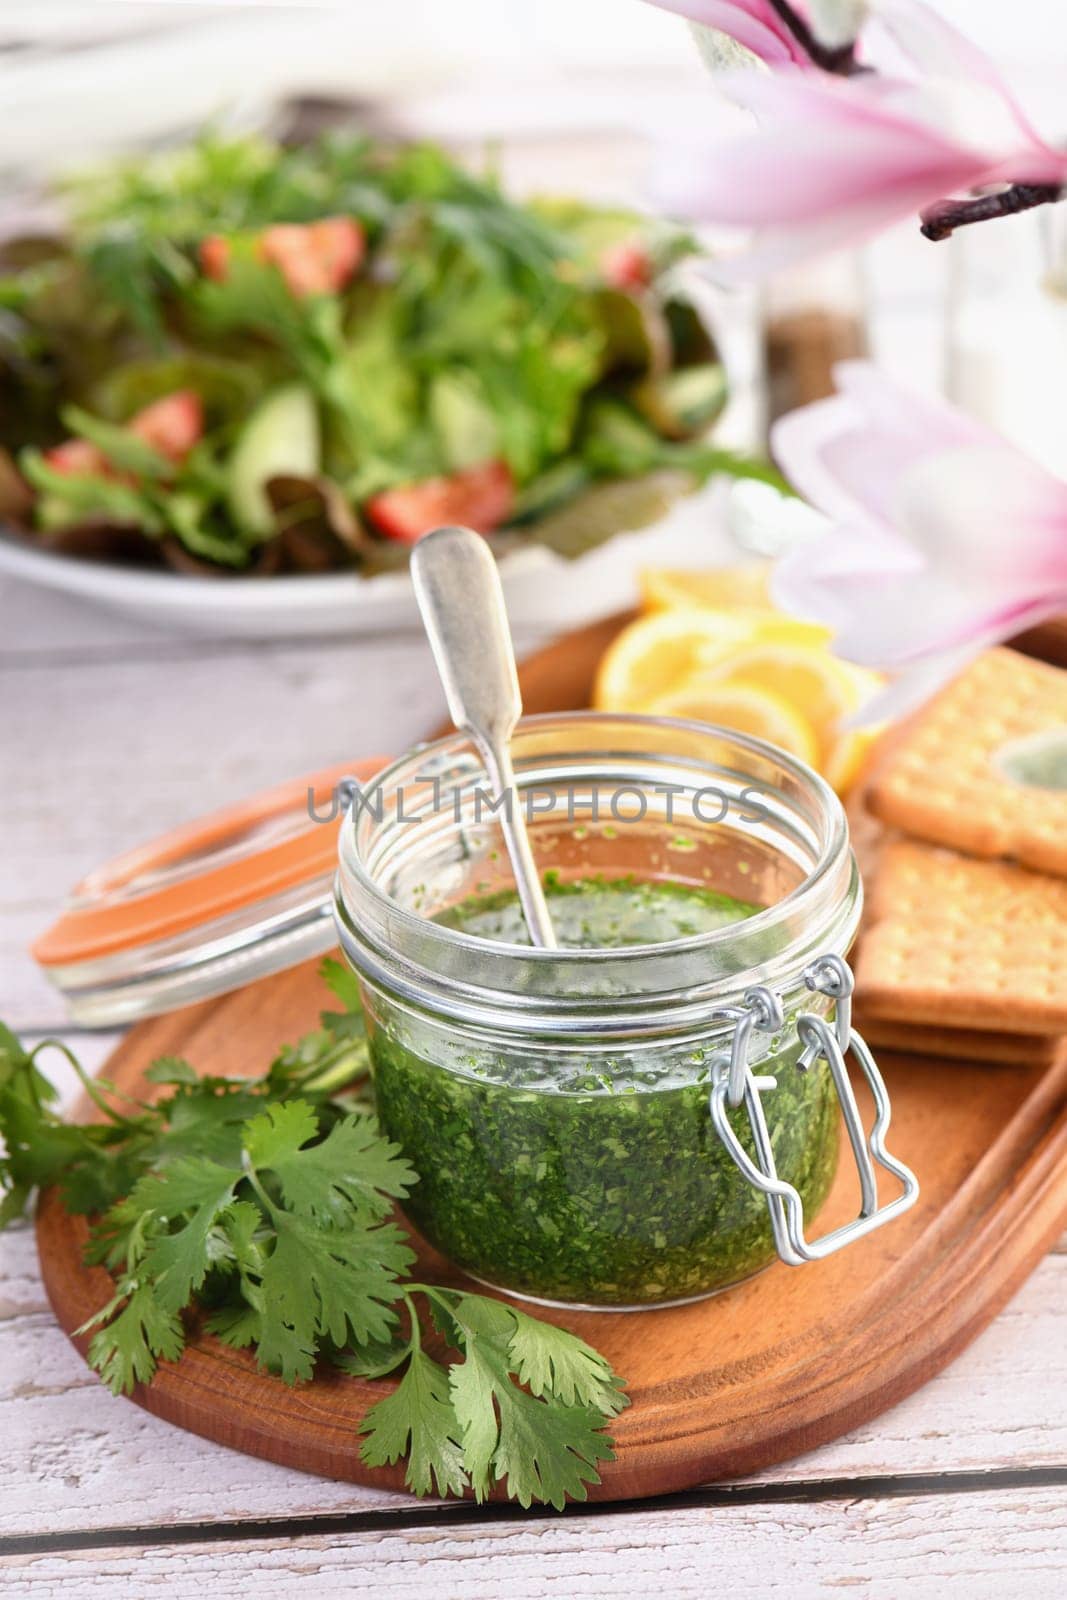 Green sauce, seasoning for salad by Apolonia